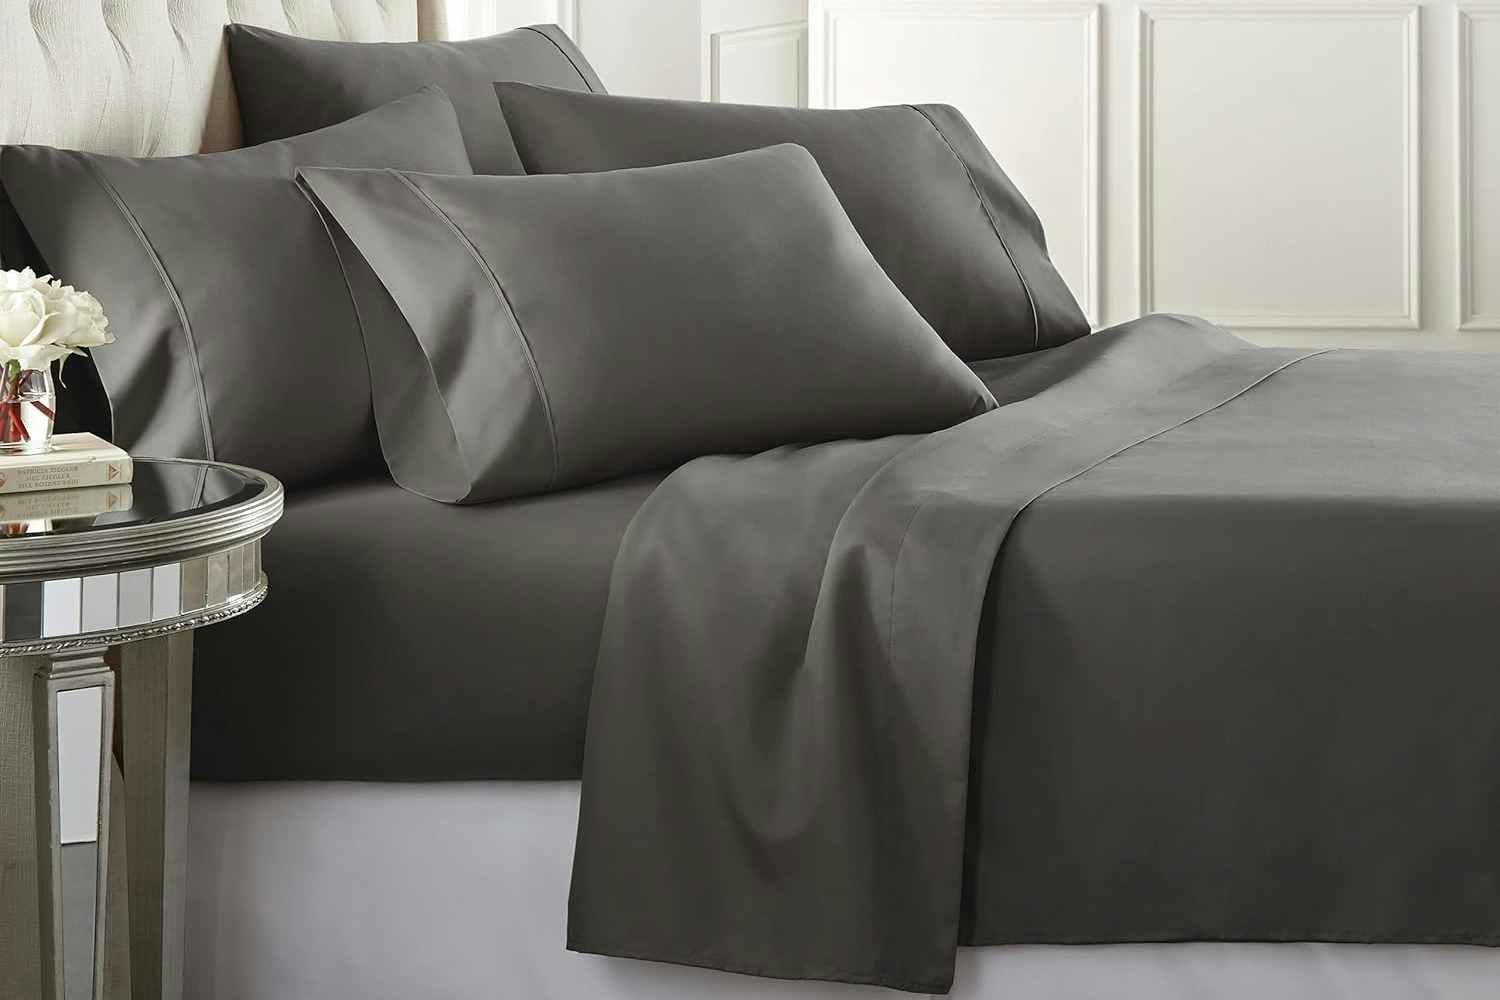 This Queen-Size Sheet Set Is Just $11.49 With KCL Promo Code on Amazon